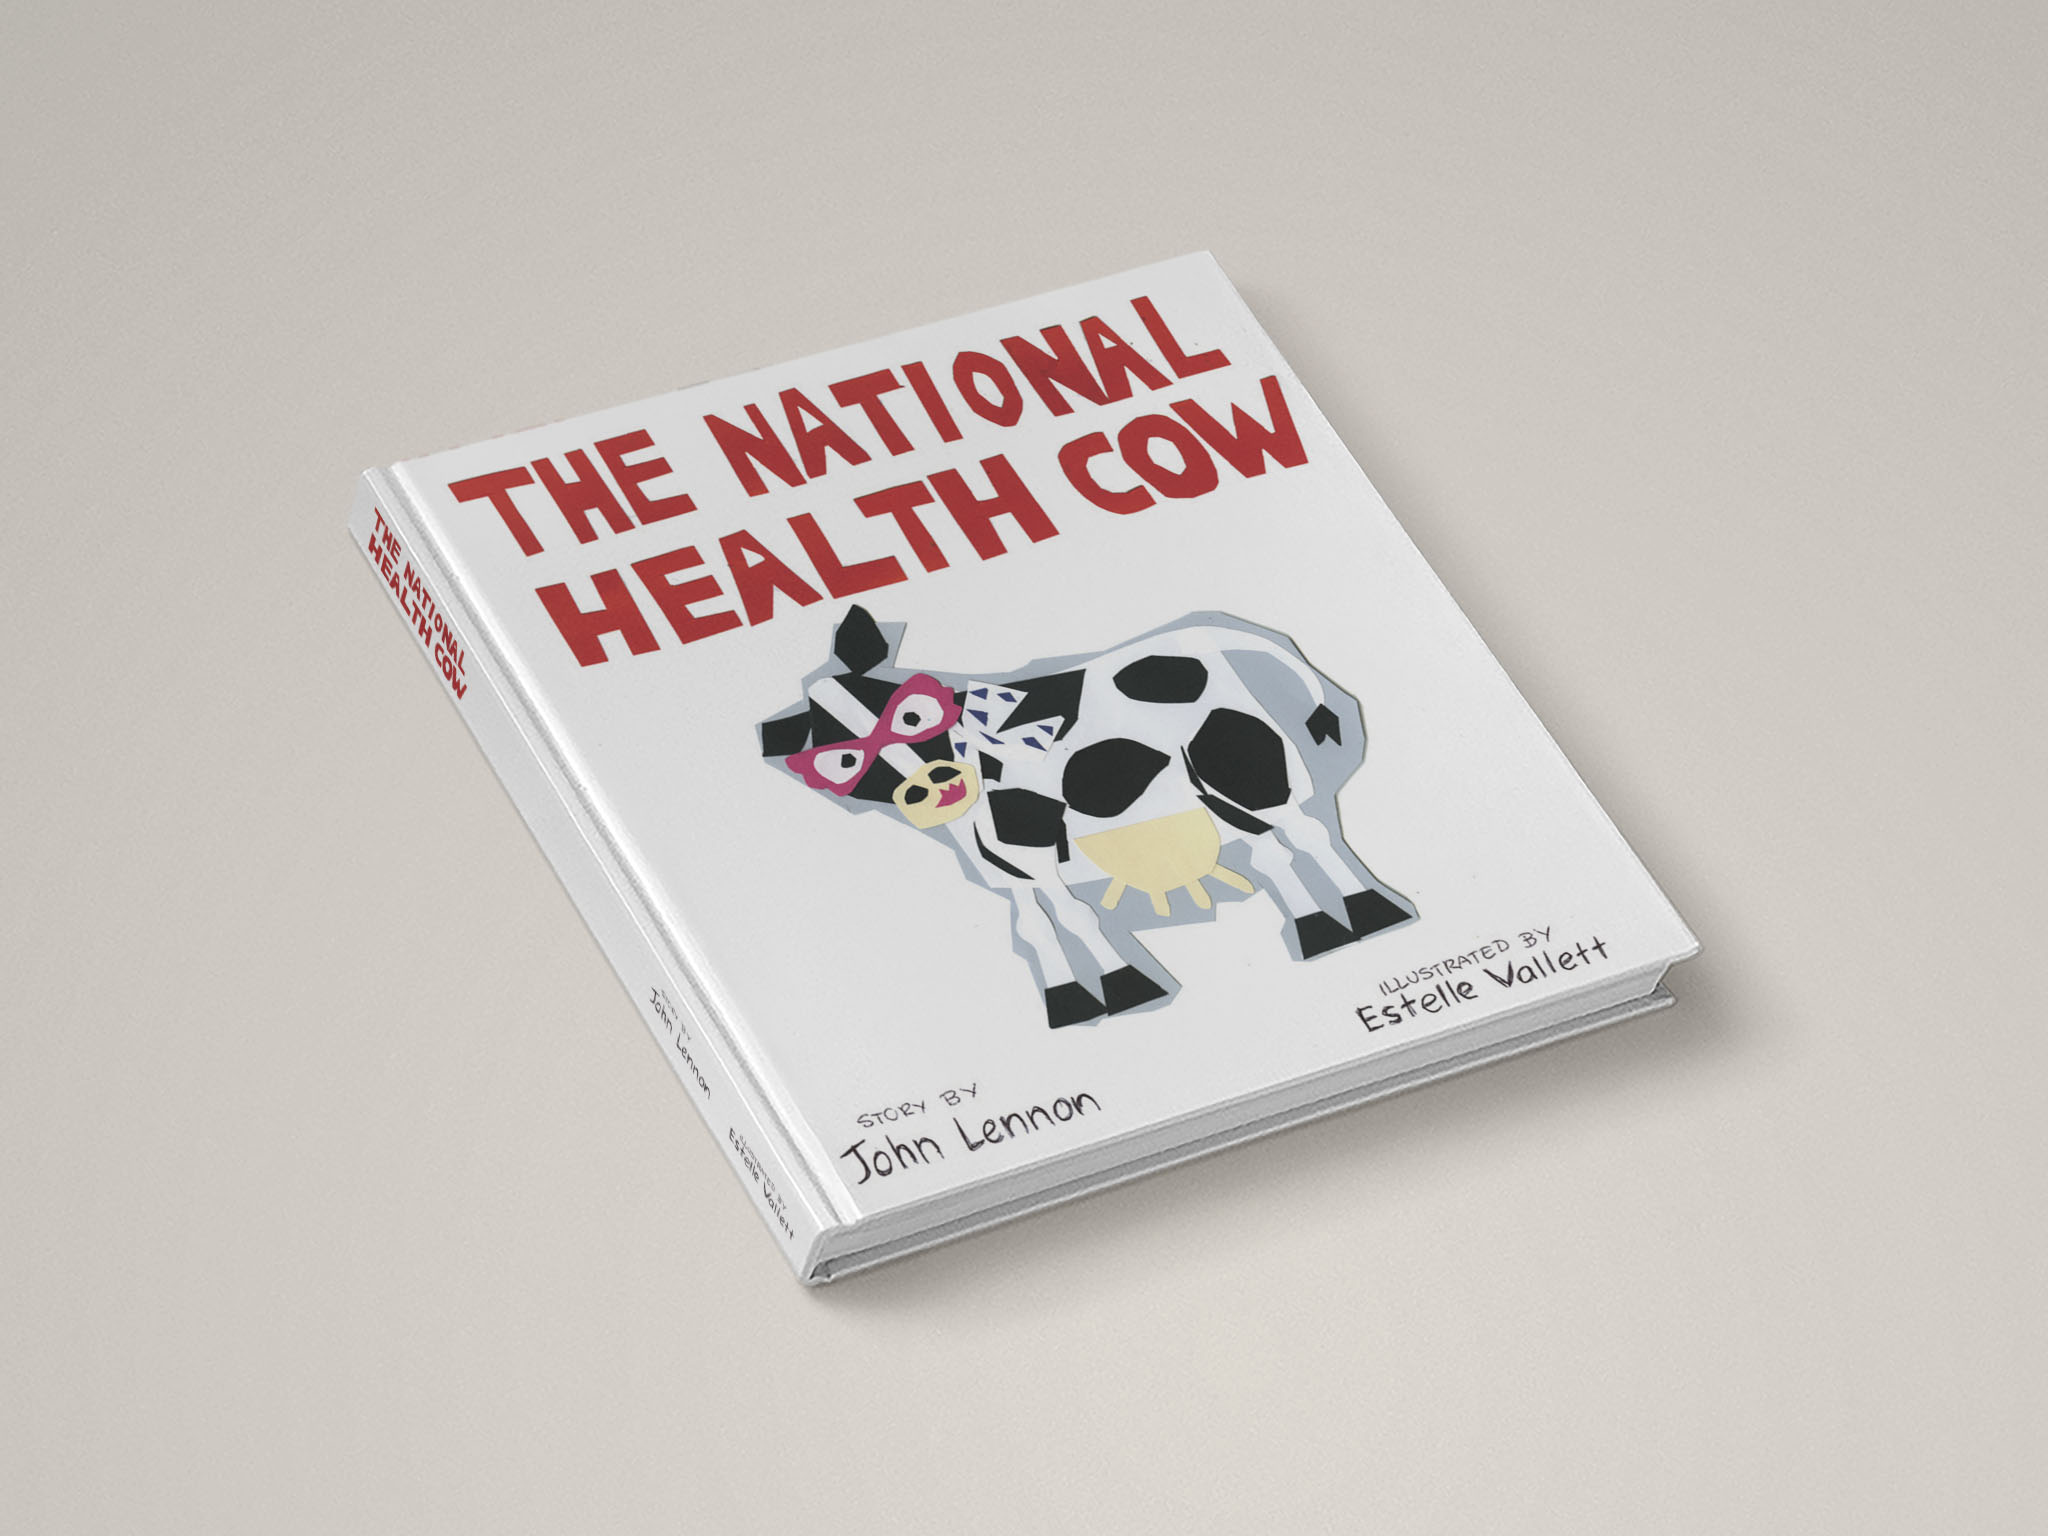 The National Health Cow